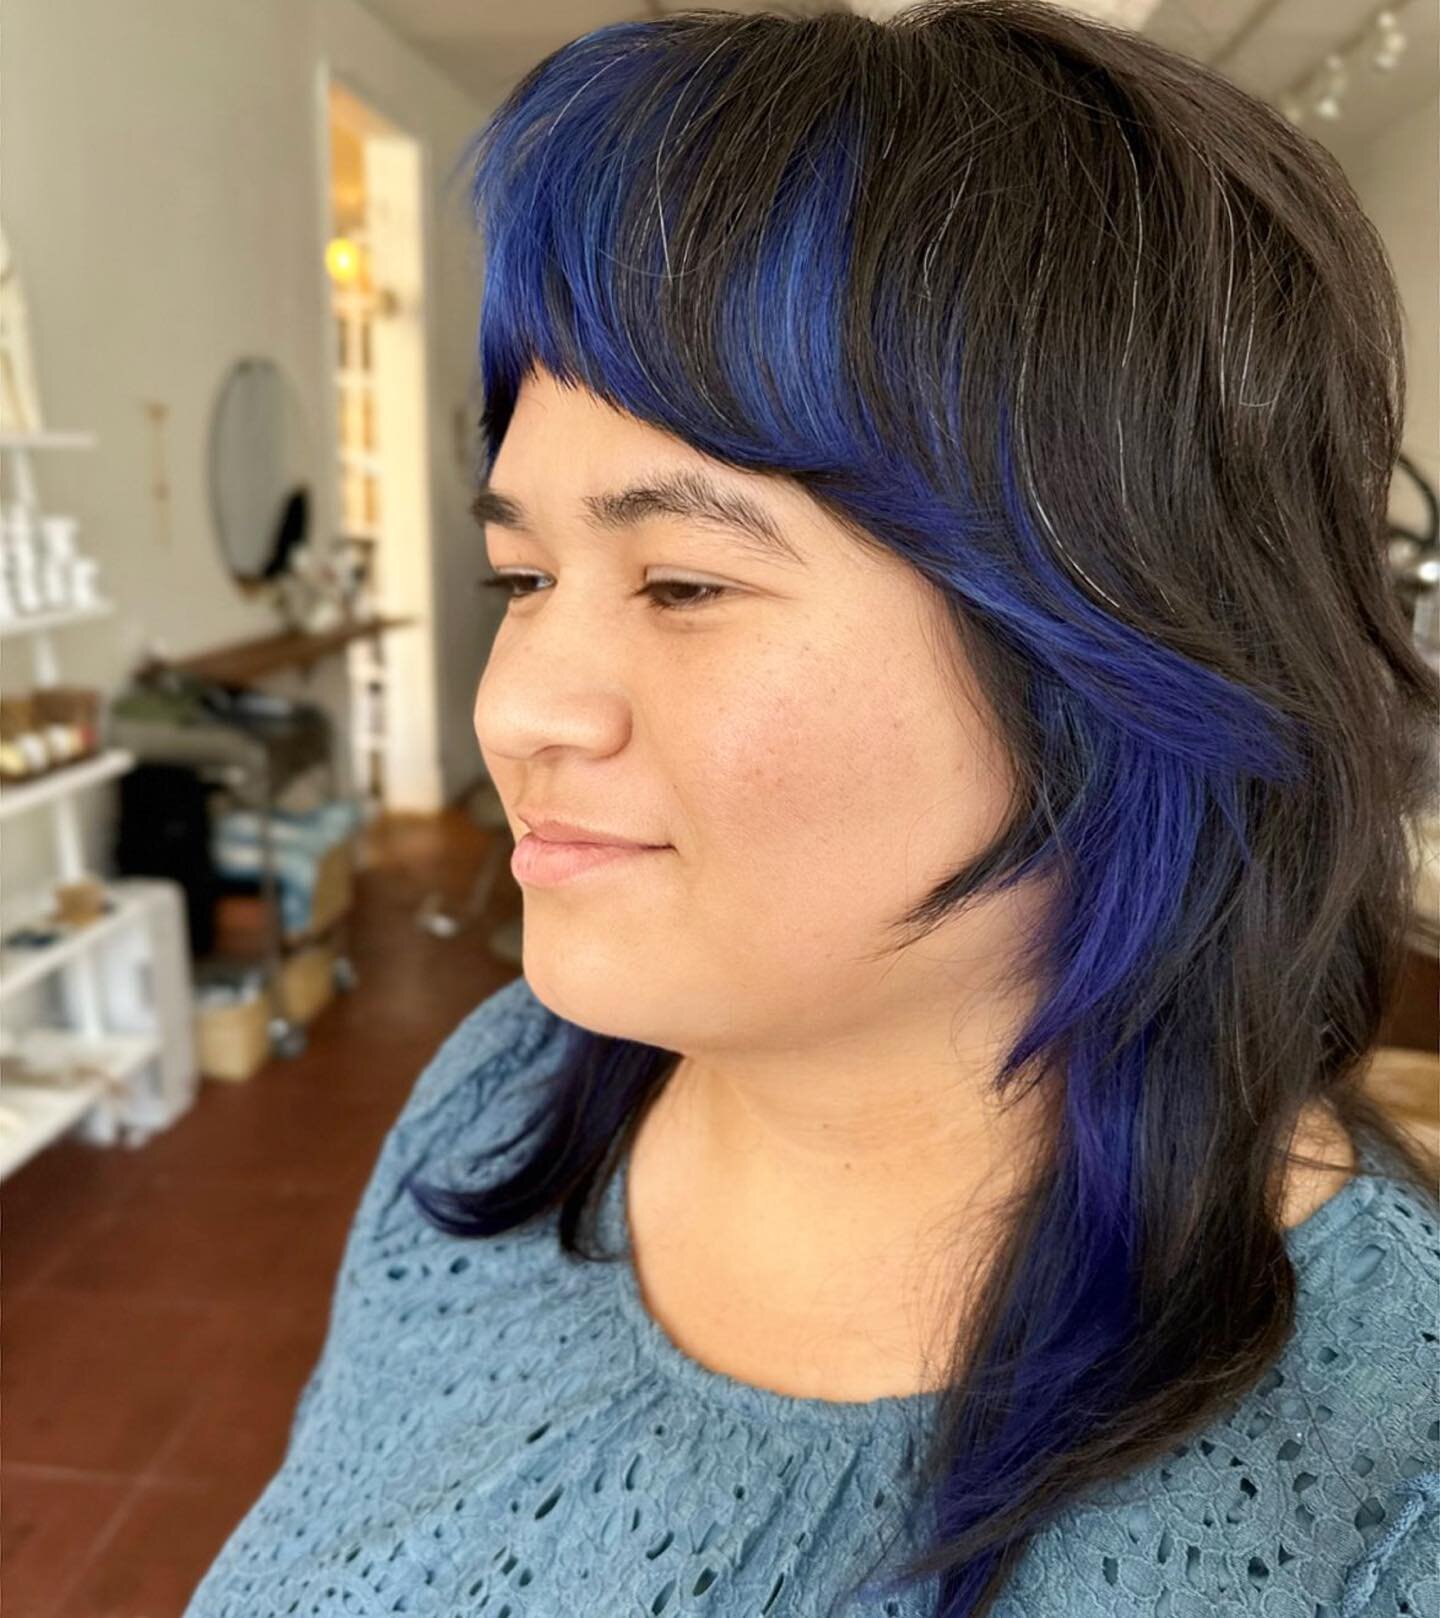 A little pop of color to bring out this cute lil shag do&rsquo;

Color can be such a fun way to enhance your hair! It doesn&rsquo;t have to be bold or an all over change. Sometimes just a little lightness in the right places or a pop of color makes a